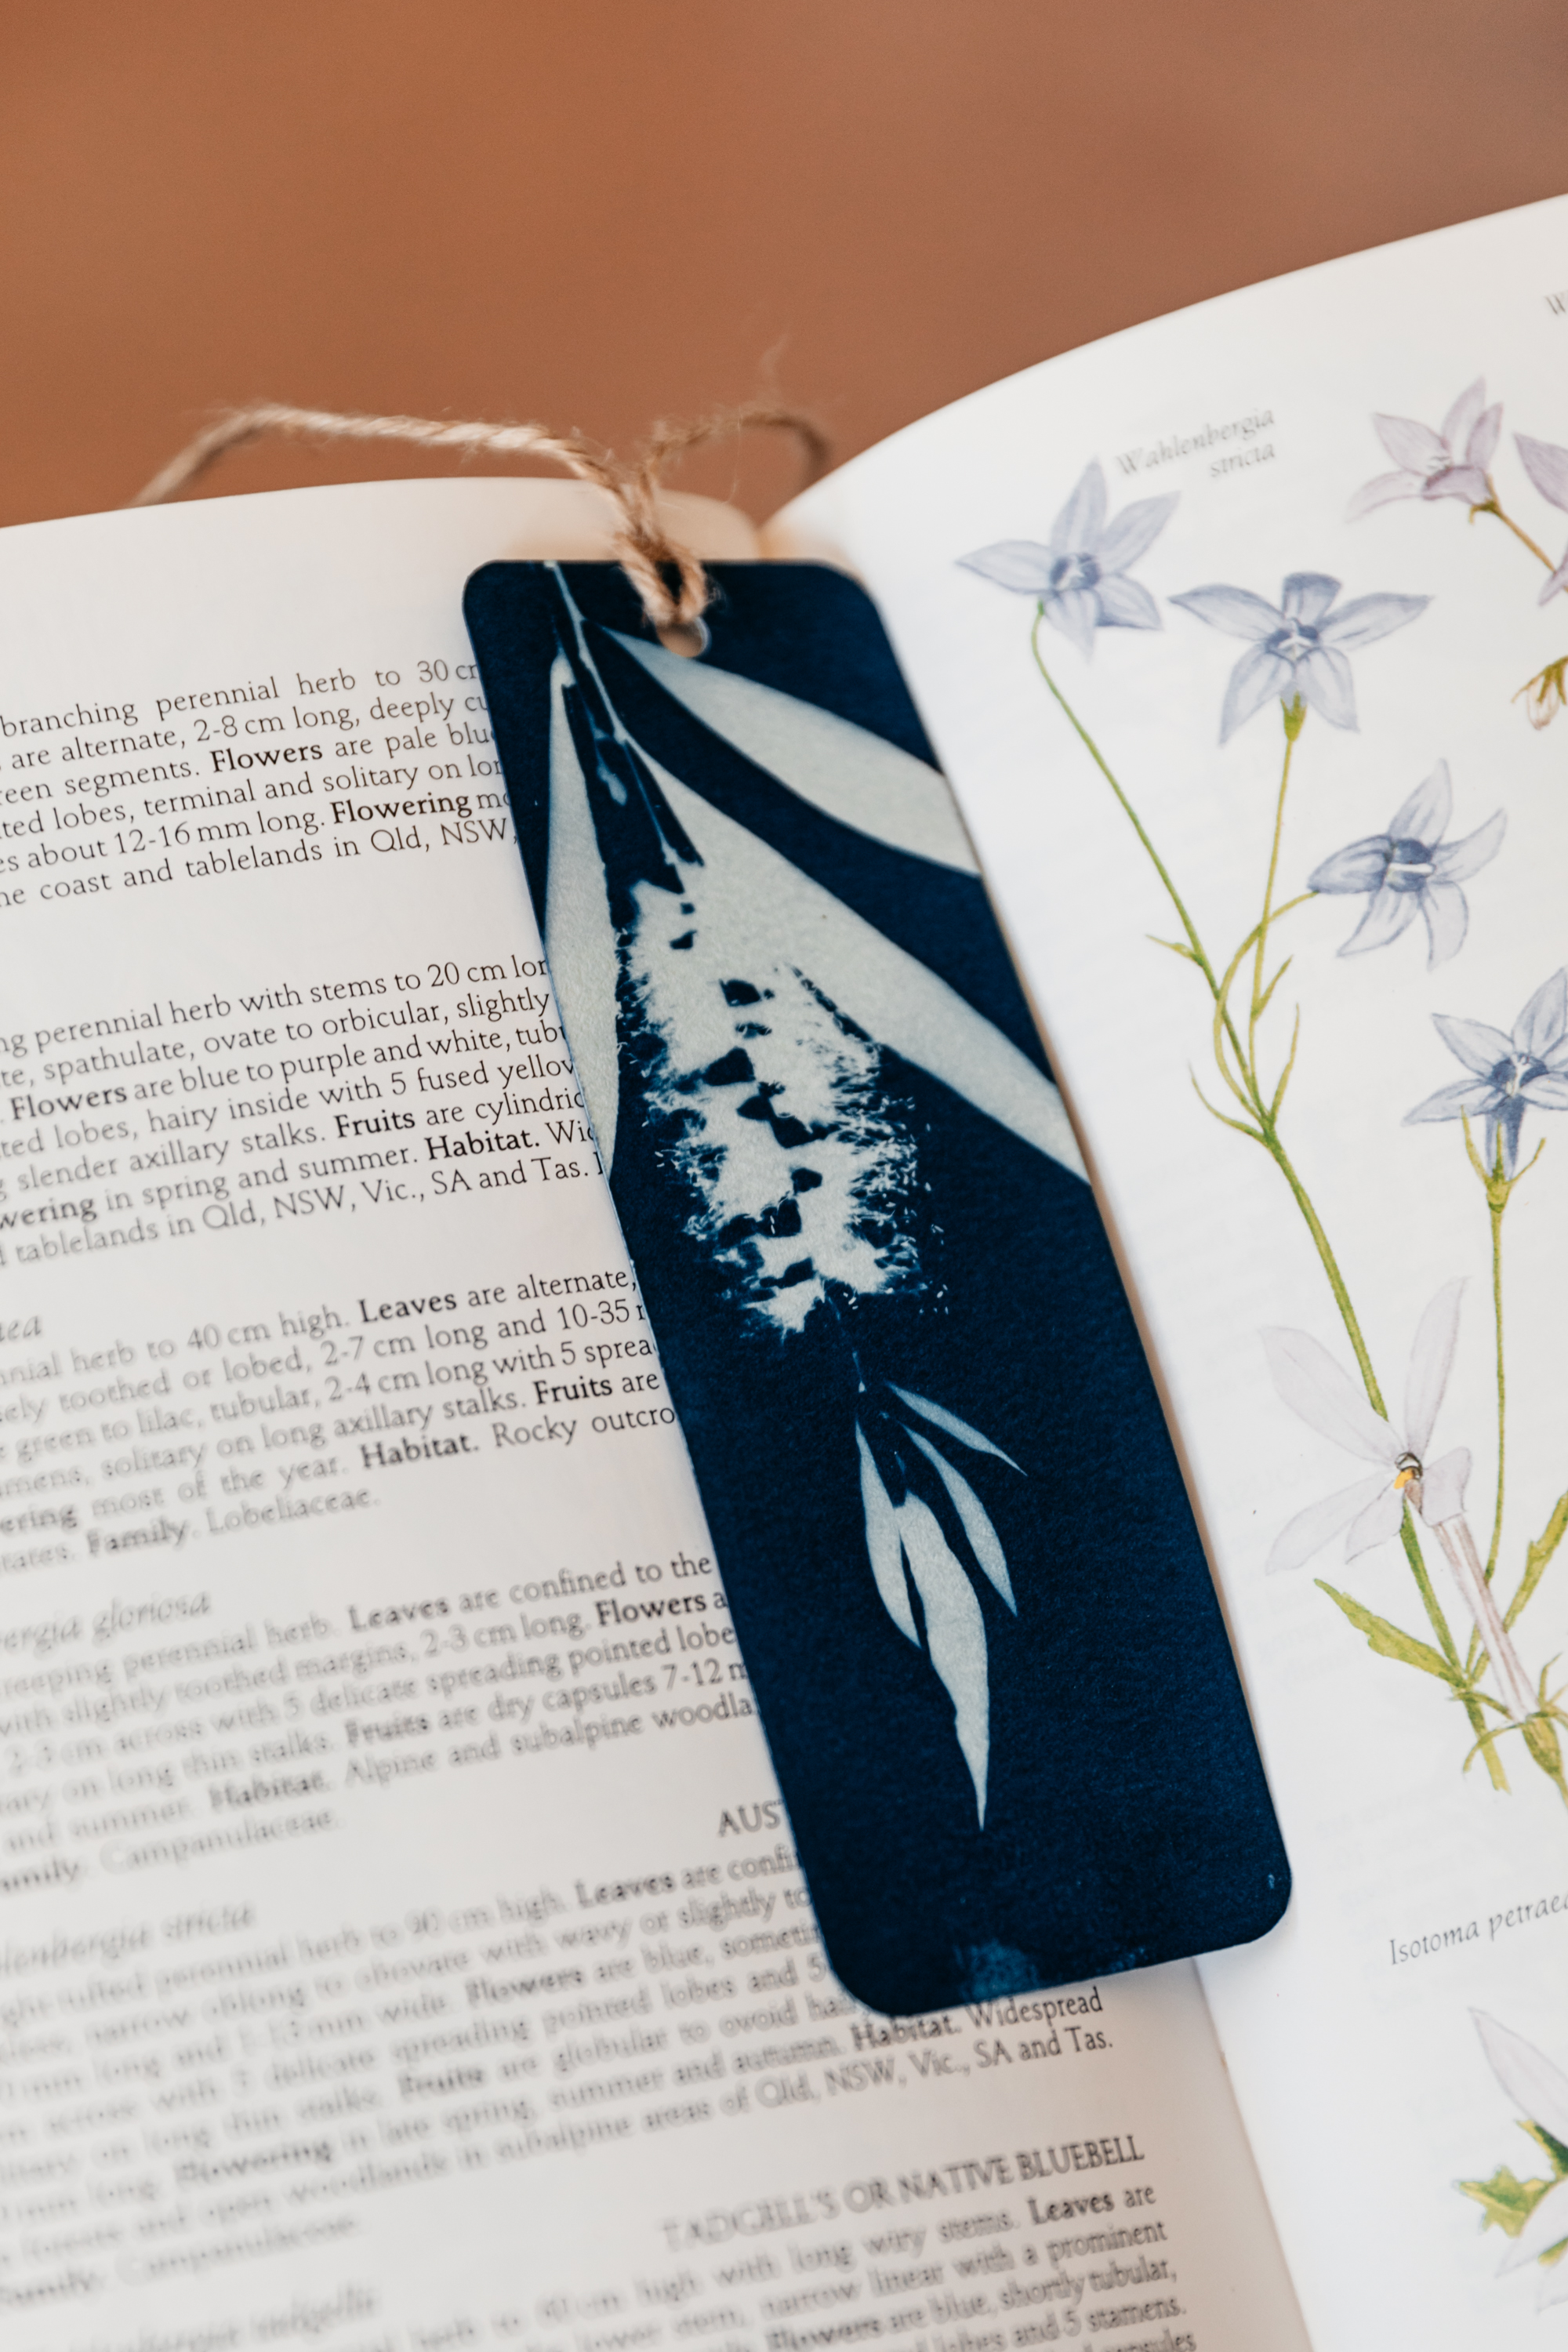 A blue bookmark lays on an open page of a book. it features the white silhouette images of small flowers made using the cyanotype printing process by Blue Bower Art